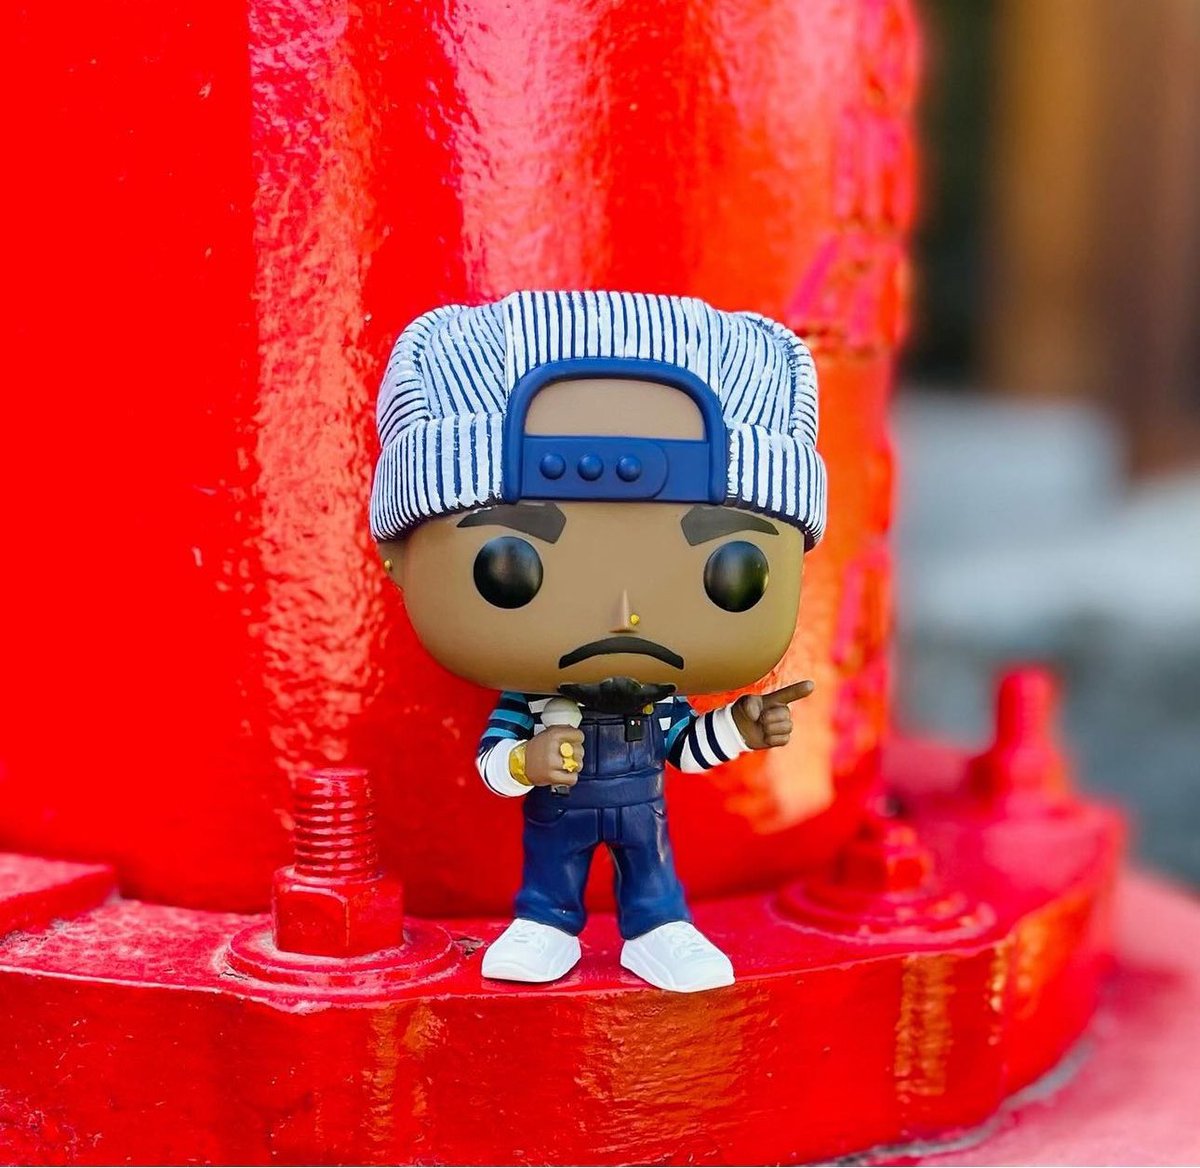 First look at Tupac Pop! . Credit @boxlunchcerritos #Tupac #TupacShakur #Funko #FunkoPop #FunkoPopVinyl #Pop #PopVinyl #Collectibles #Collectible #FunkoCollector #FunkoPops #Collector #Toy #Toys #DisTrackers